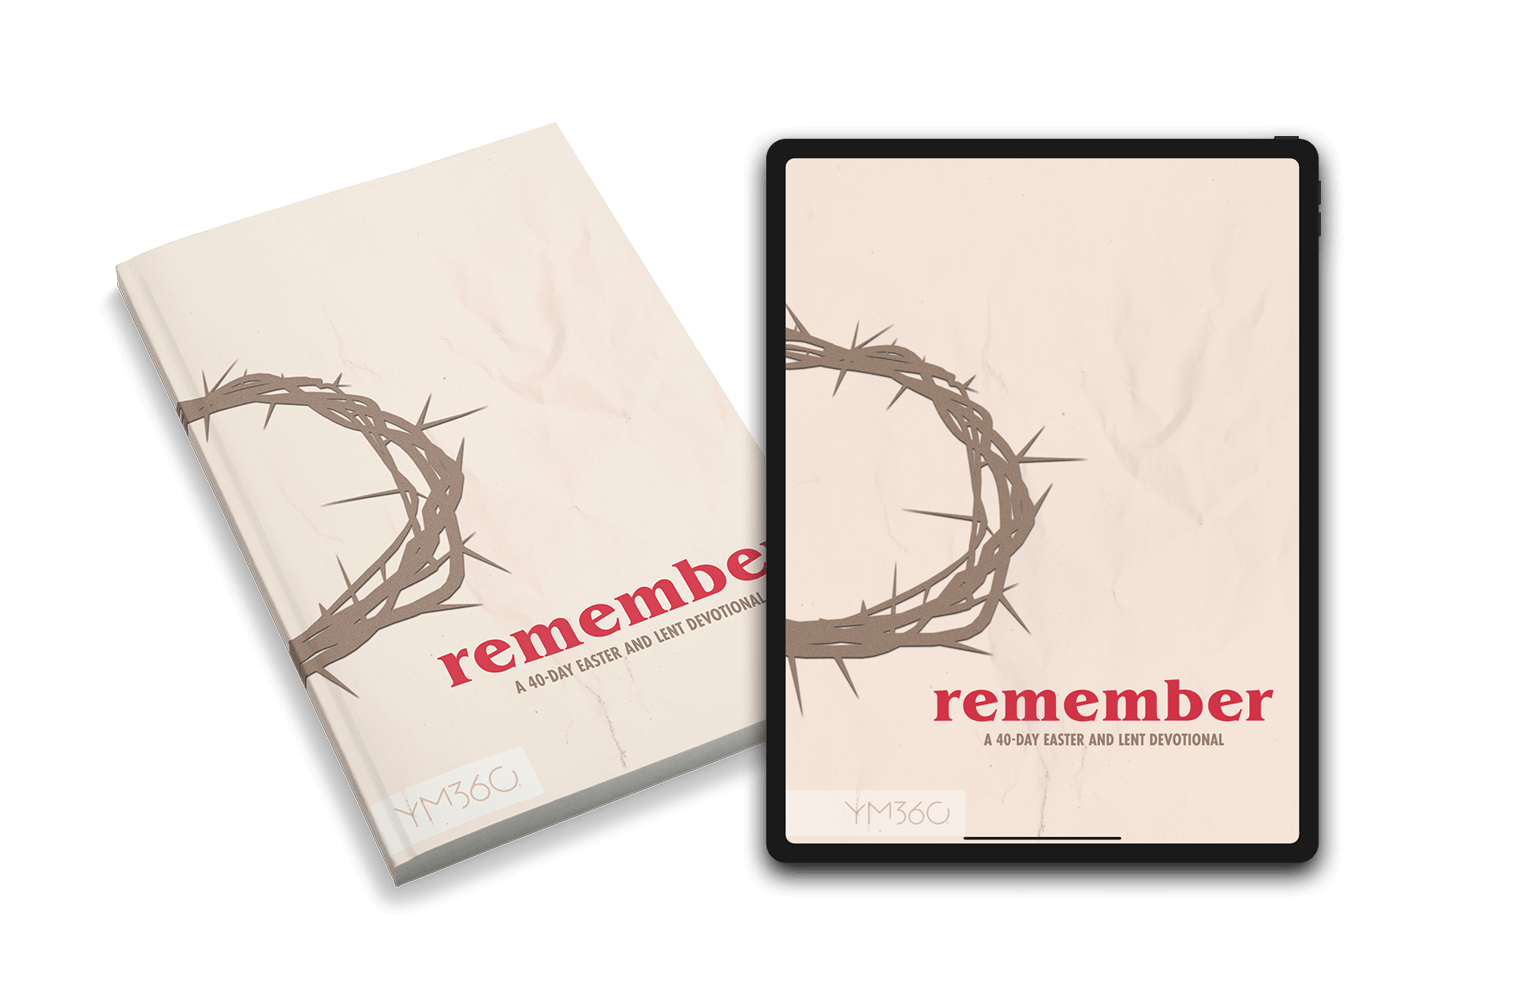 [DOWNLOADABLE VERSION] Remember: A 40-Day Easter and Lent Devotional